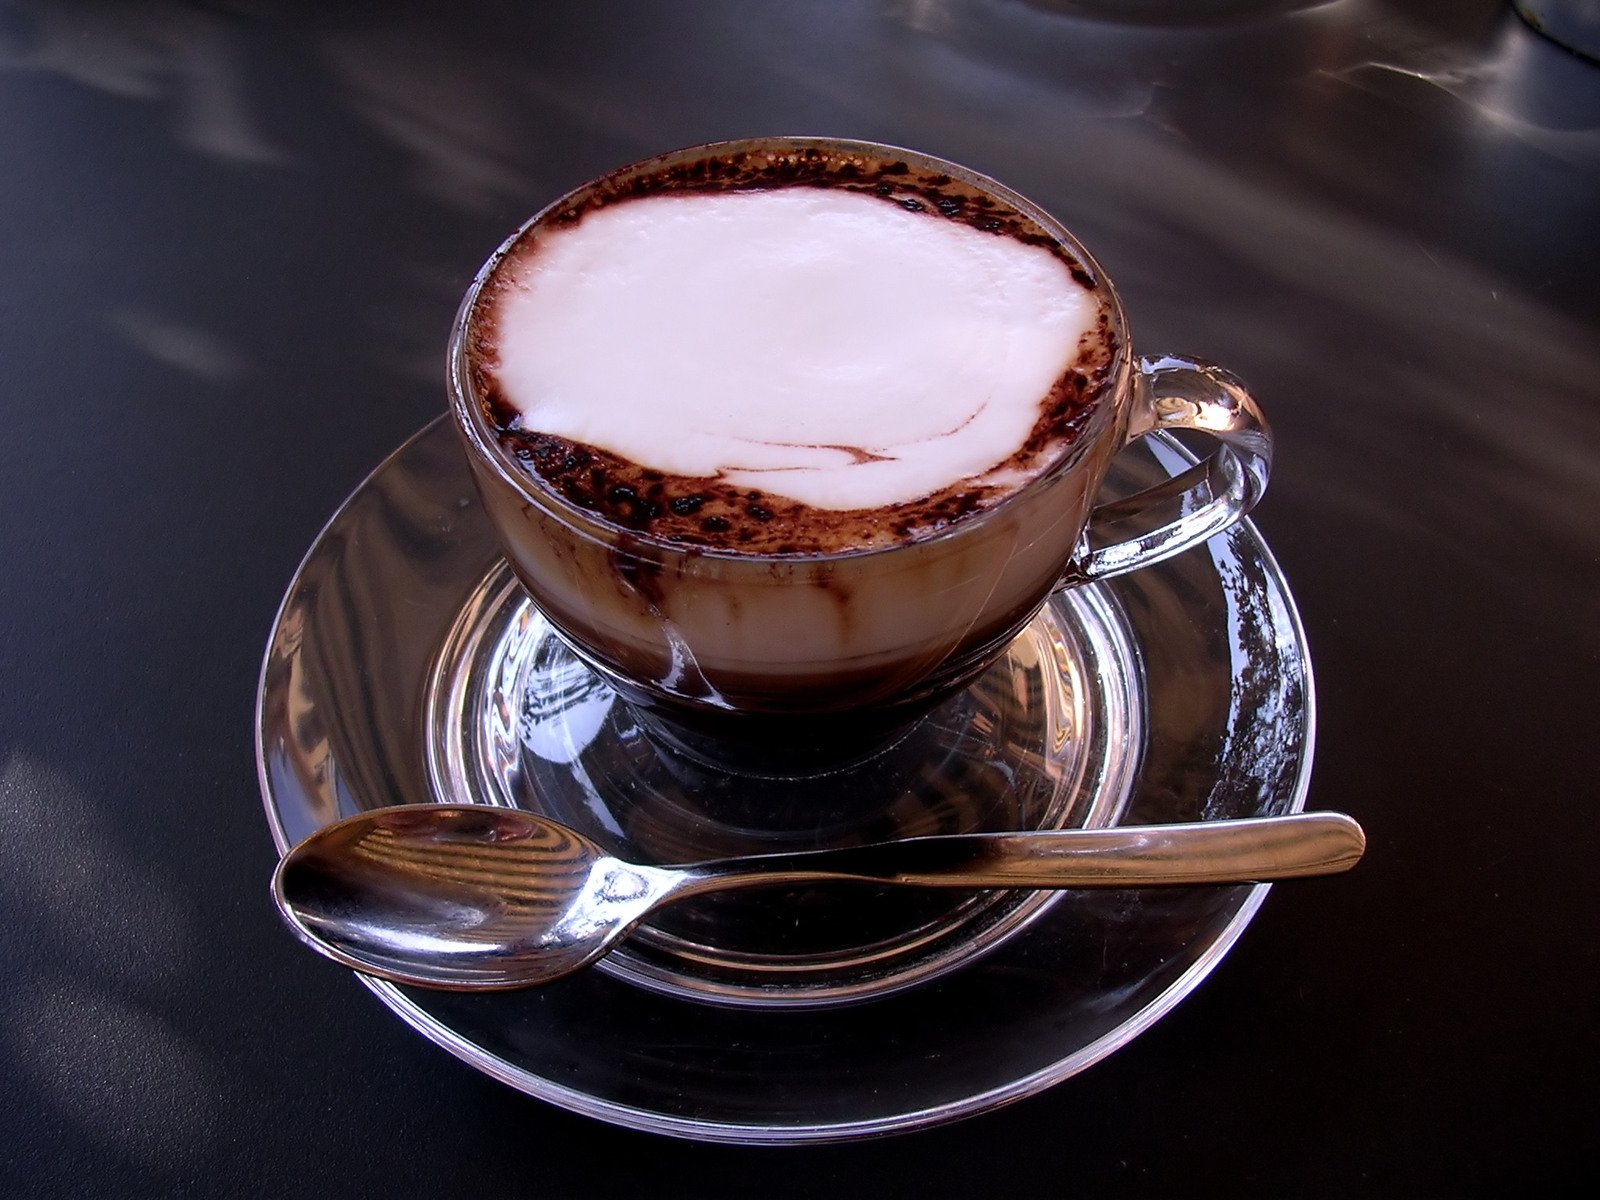 a cup of  chocolate sits on a saucer with a spoon